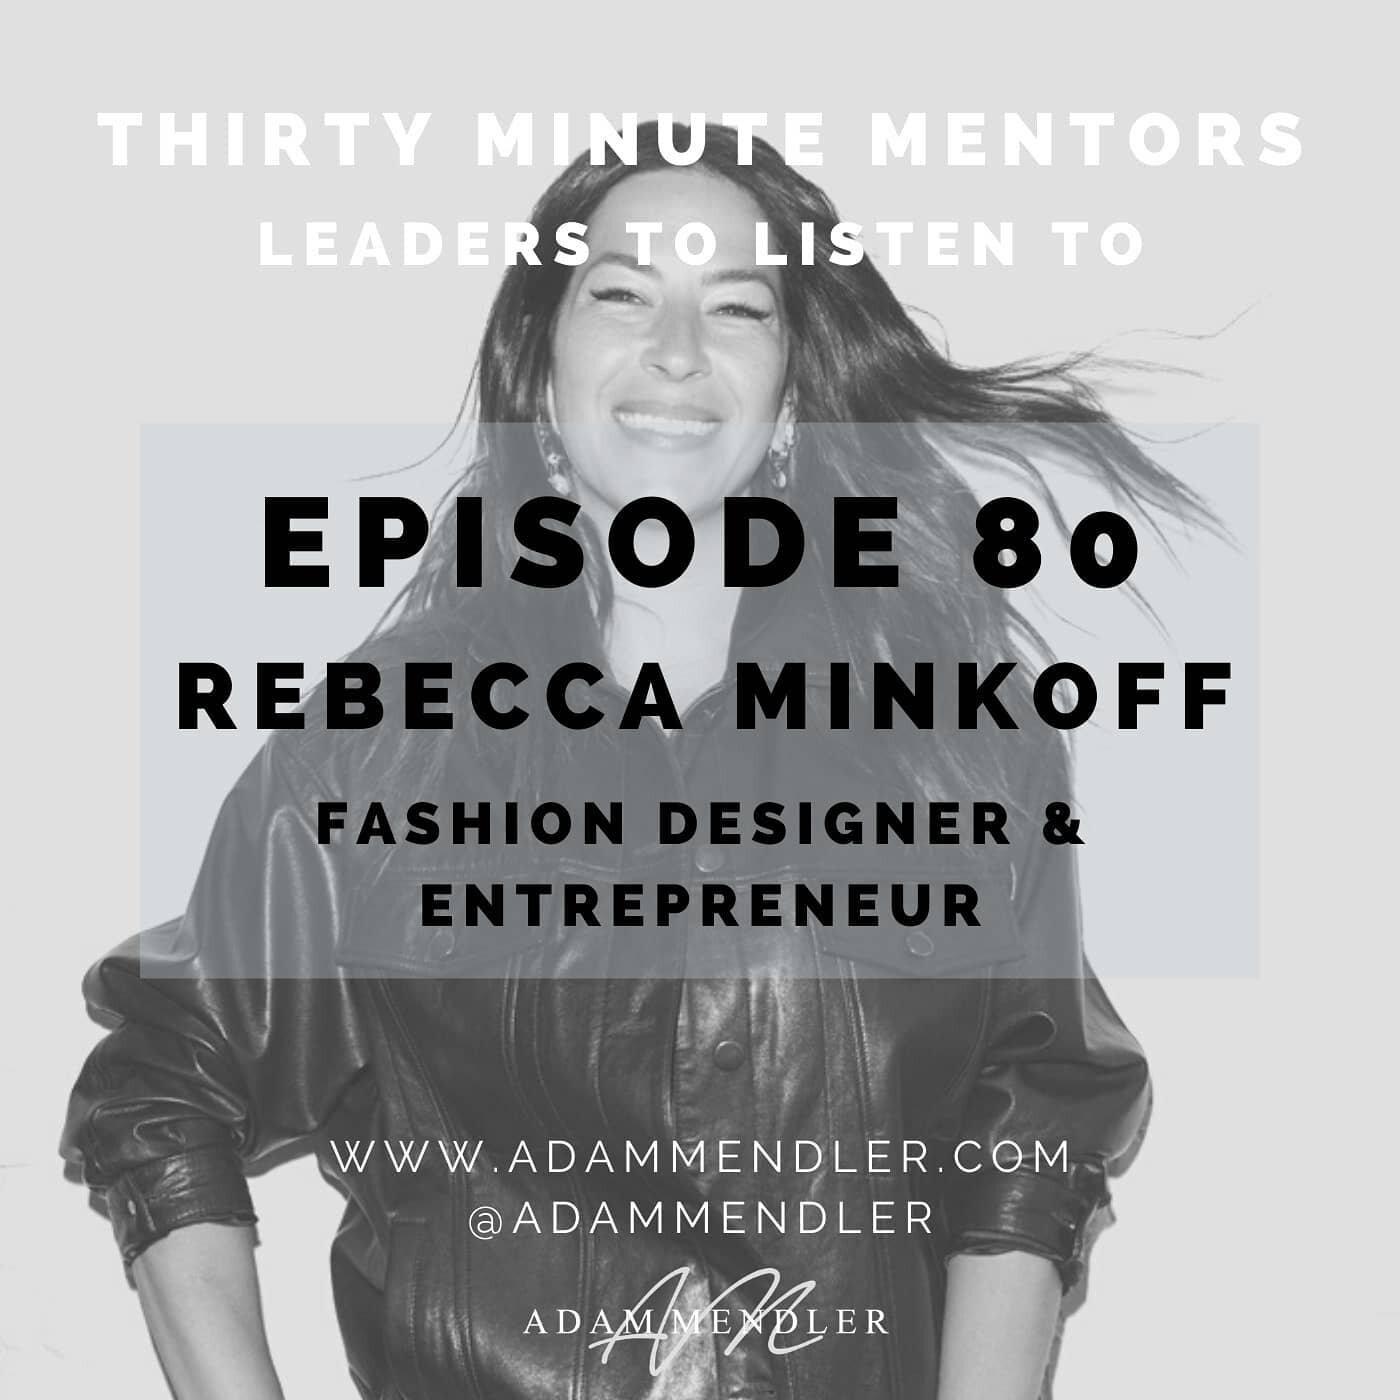 A leader in the world of women&rsquo;s fashion, @rebeccaminkoff is the co-founder and creative visionary behind the company that bears her name. Rebecca joined me on Episode 80 of Thirty Minute Mentors to share her entrepreneurial journey and best le